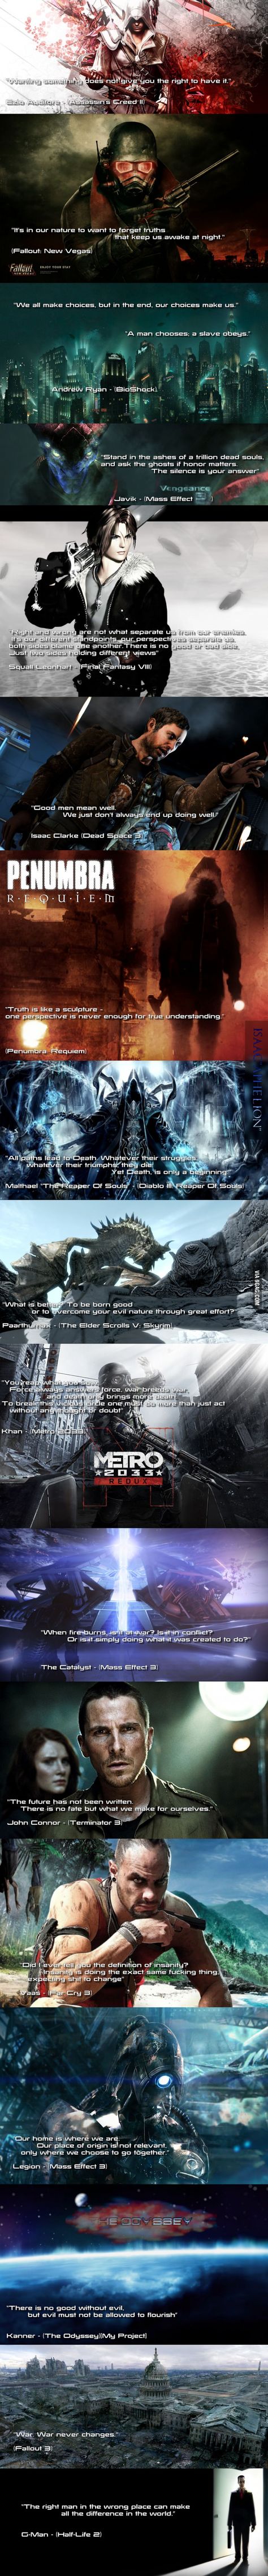 18 Awesome Game & Movie Quotes - 9GAG Quotes From Video Games, Gaming Quotes Inspirational, Video Game Quotes Inspirational, Gamer Images, Superb Quotes, Video Game Quotes, Games Quotes, Video Game Logic, Game Movie